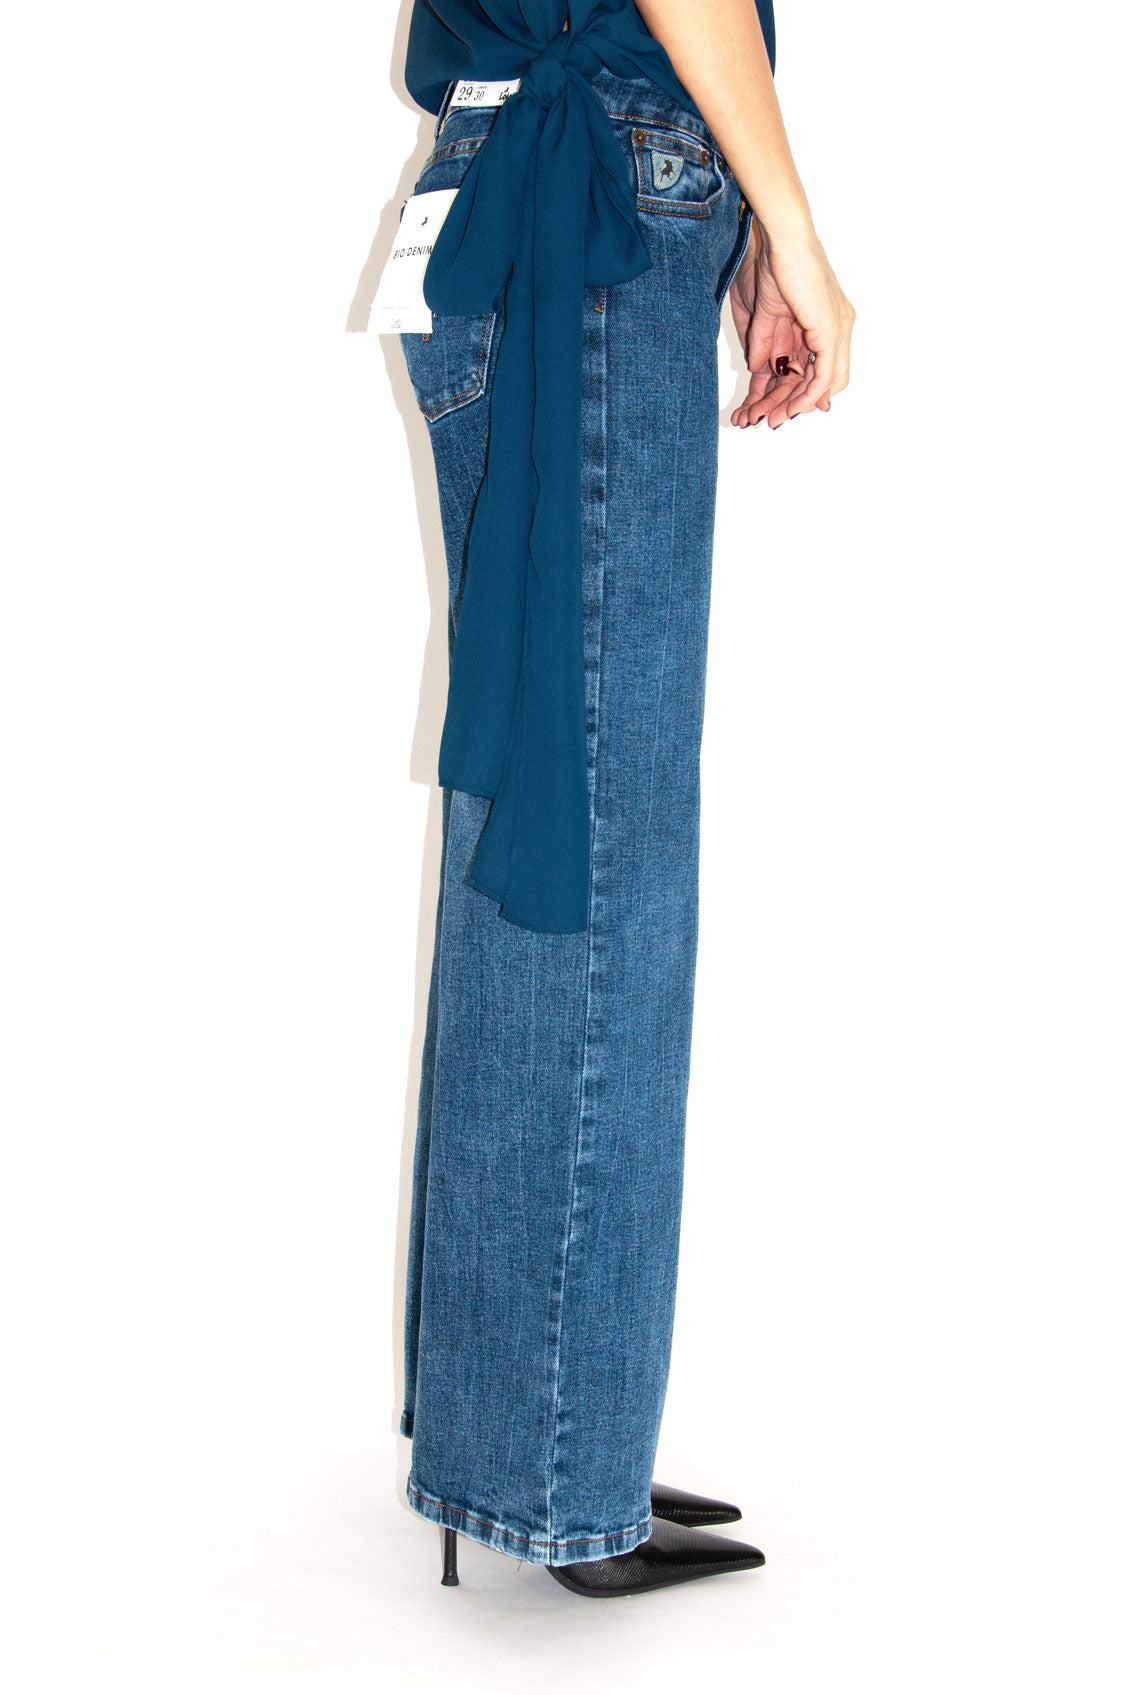 Jeans palazzo blue